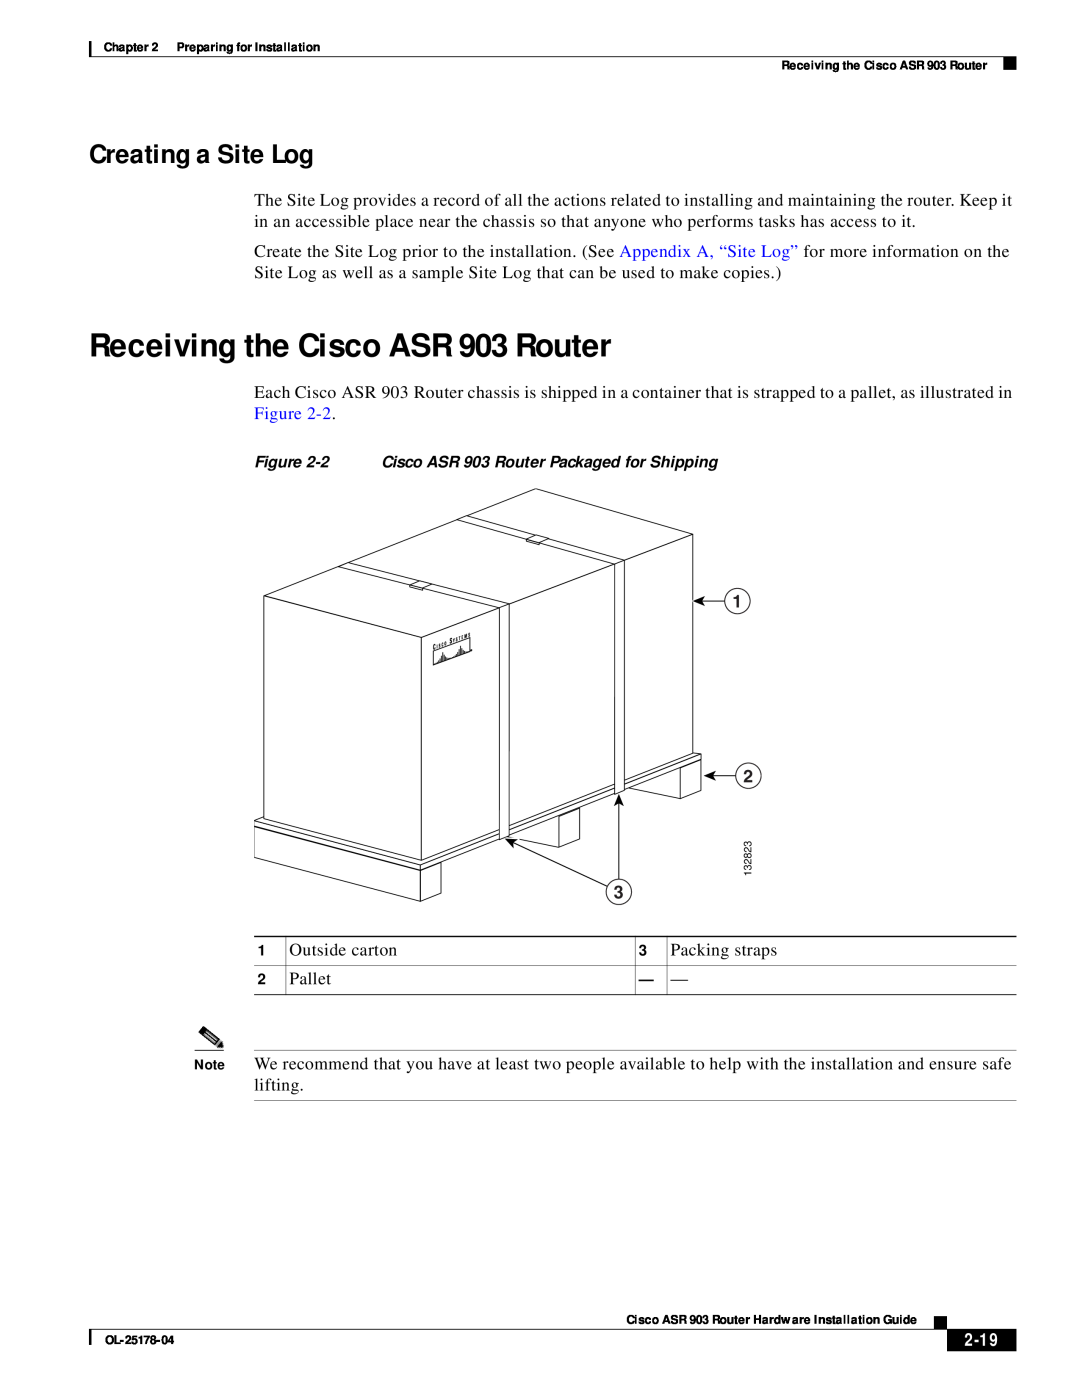 Cisco Systems manual Receiving the Cisco ASR 903 Router, Creating a Site Log, 2-19 